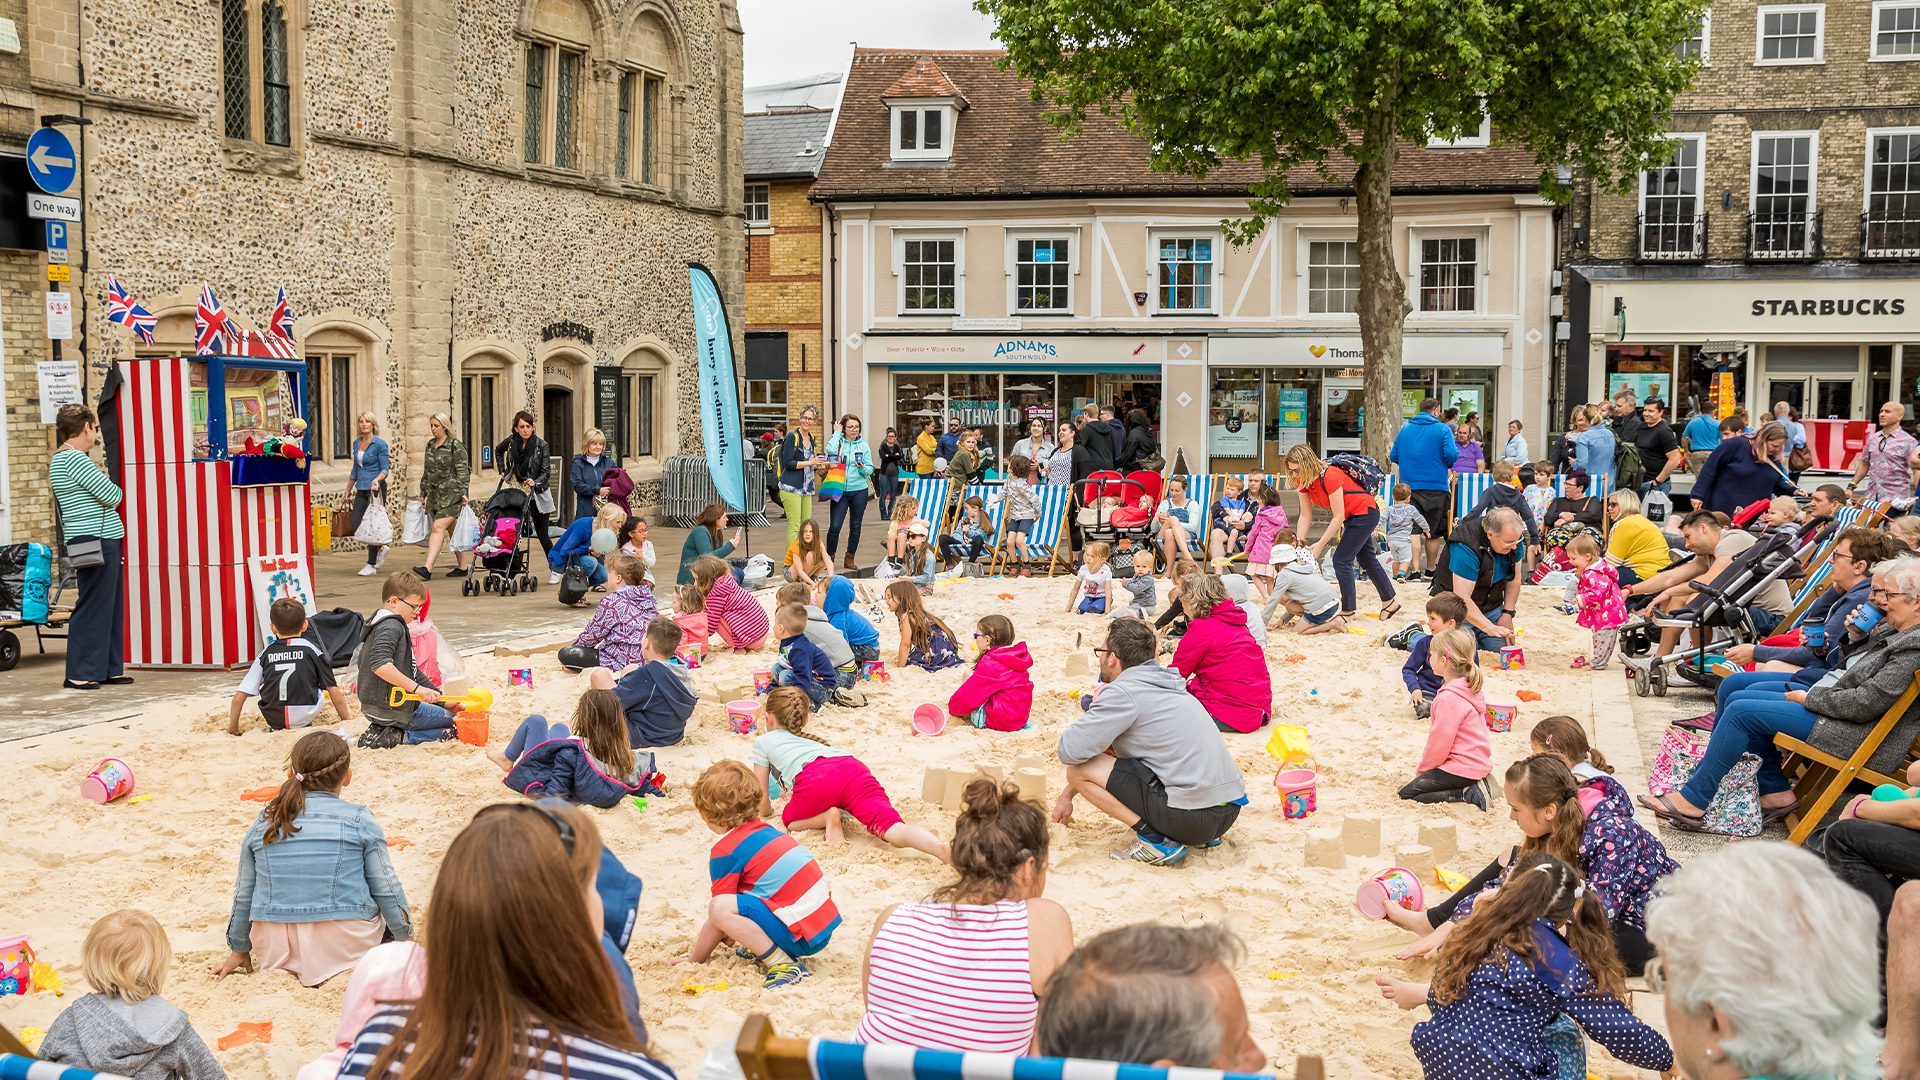 Children sat on sand watching Punch and Judy